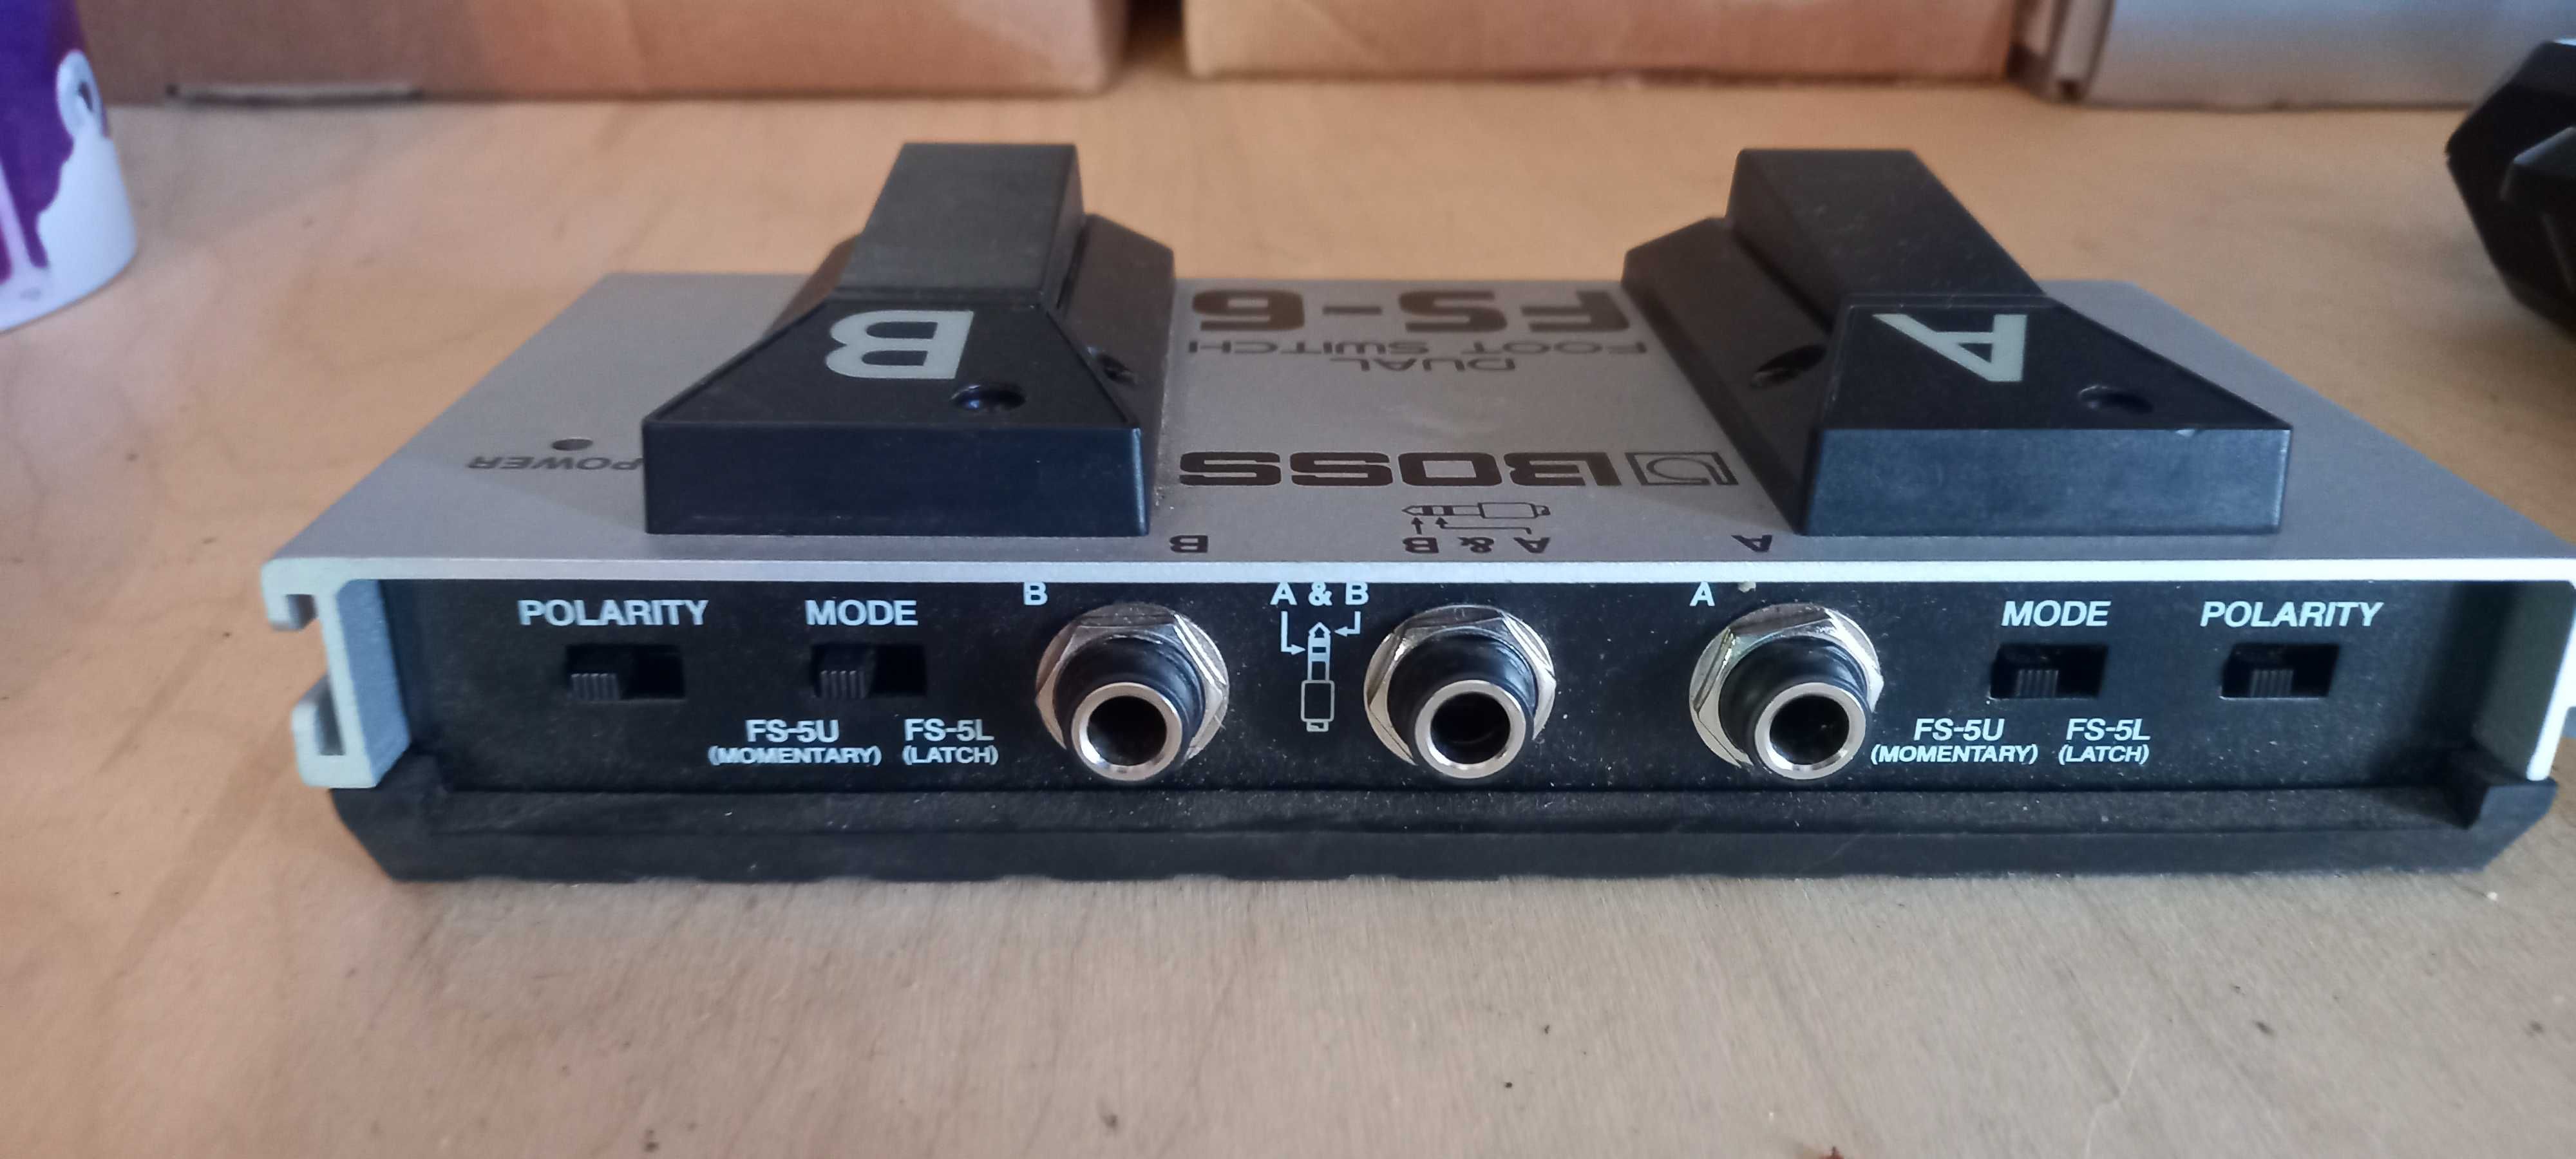 Boss Rc-505 loop station and boss Fs-6 footswitch